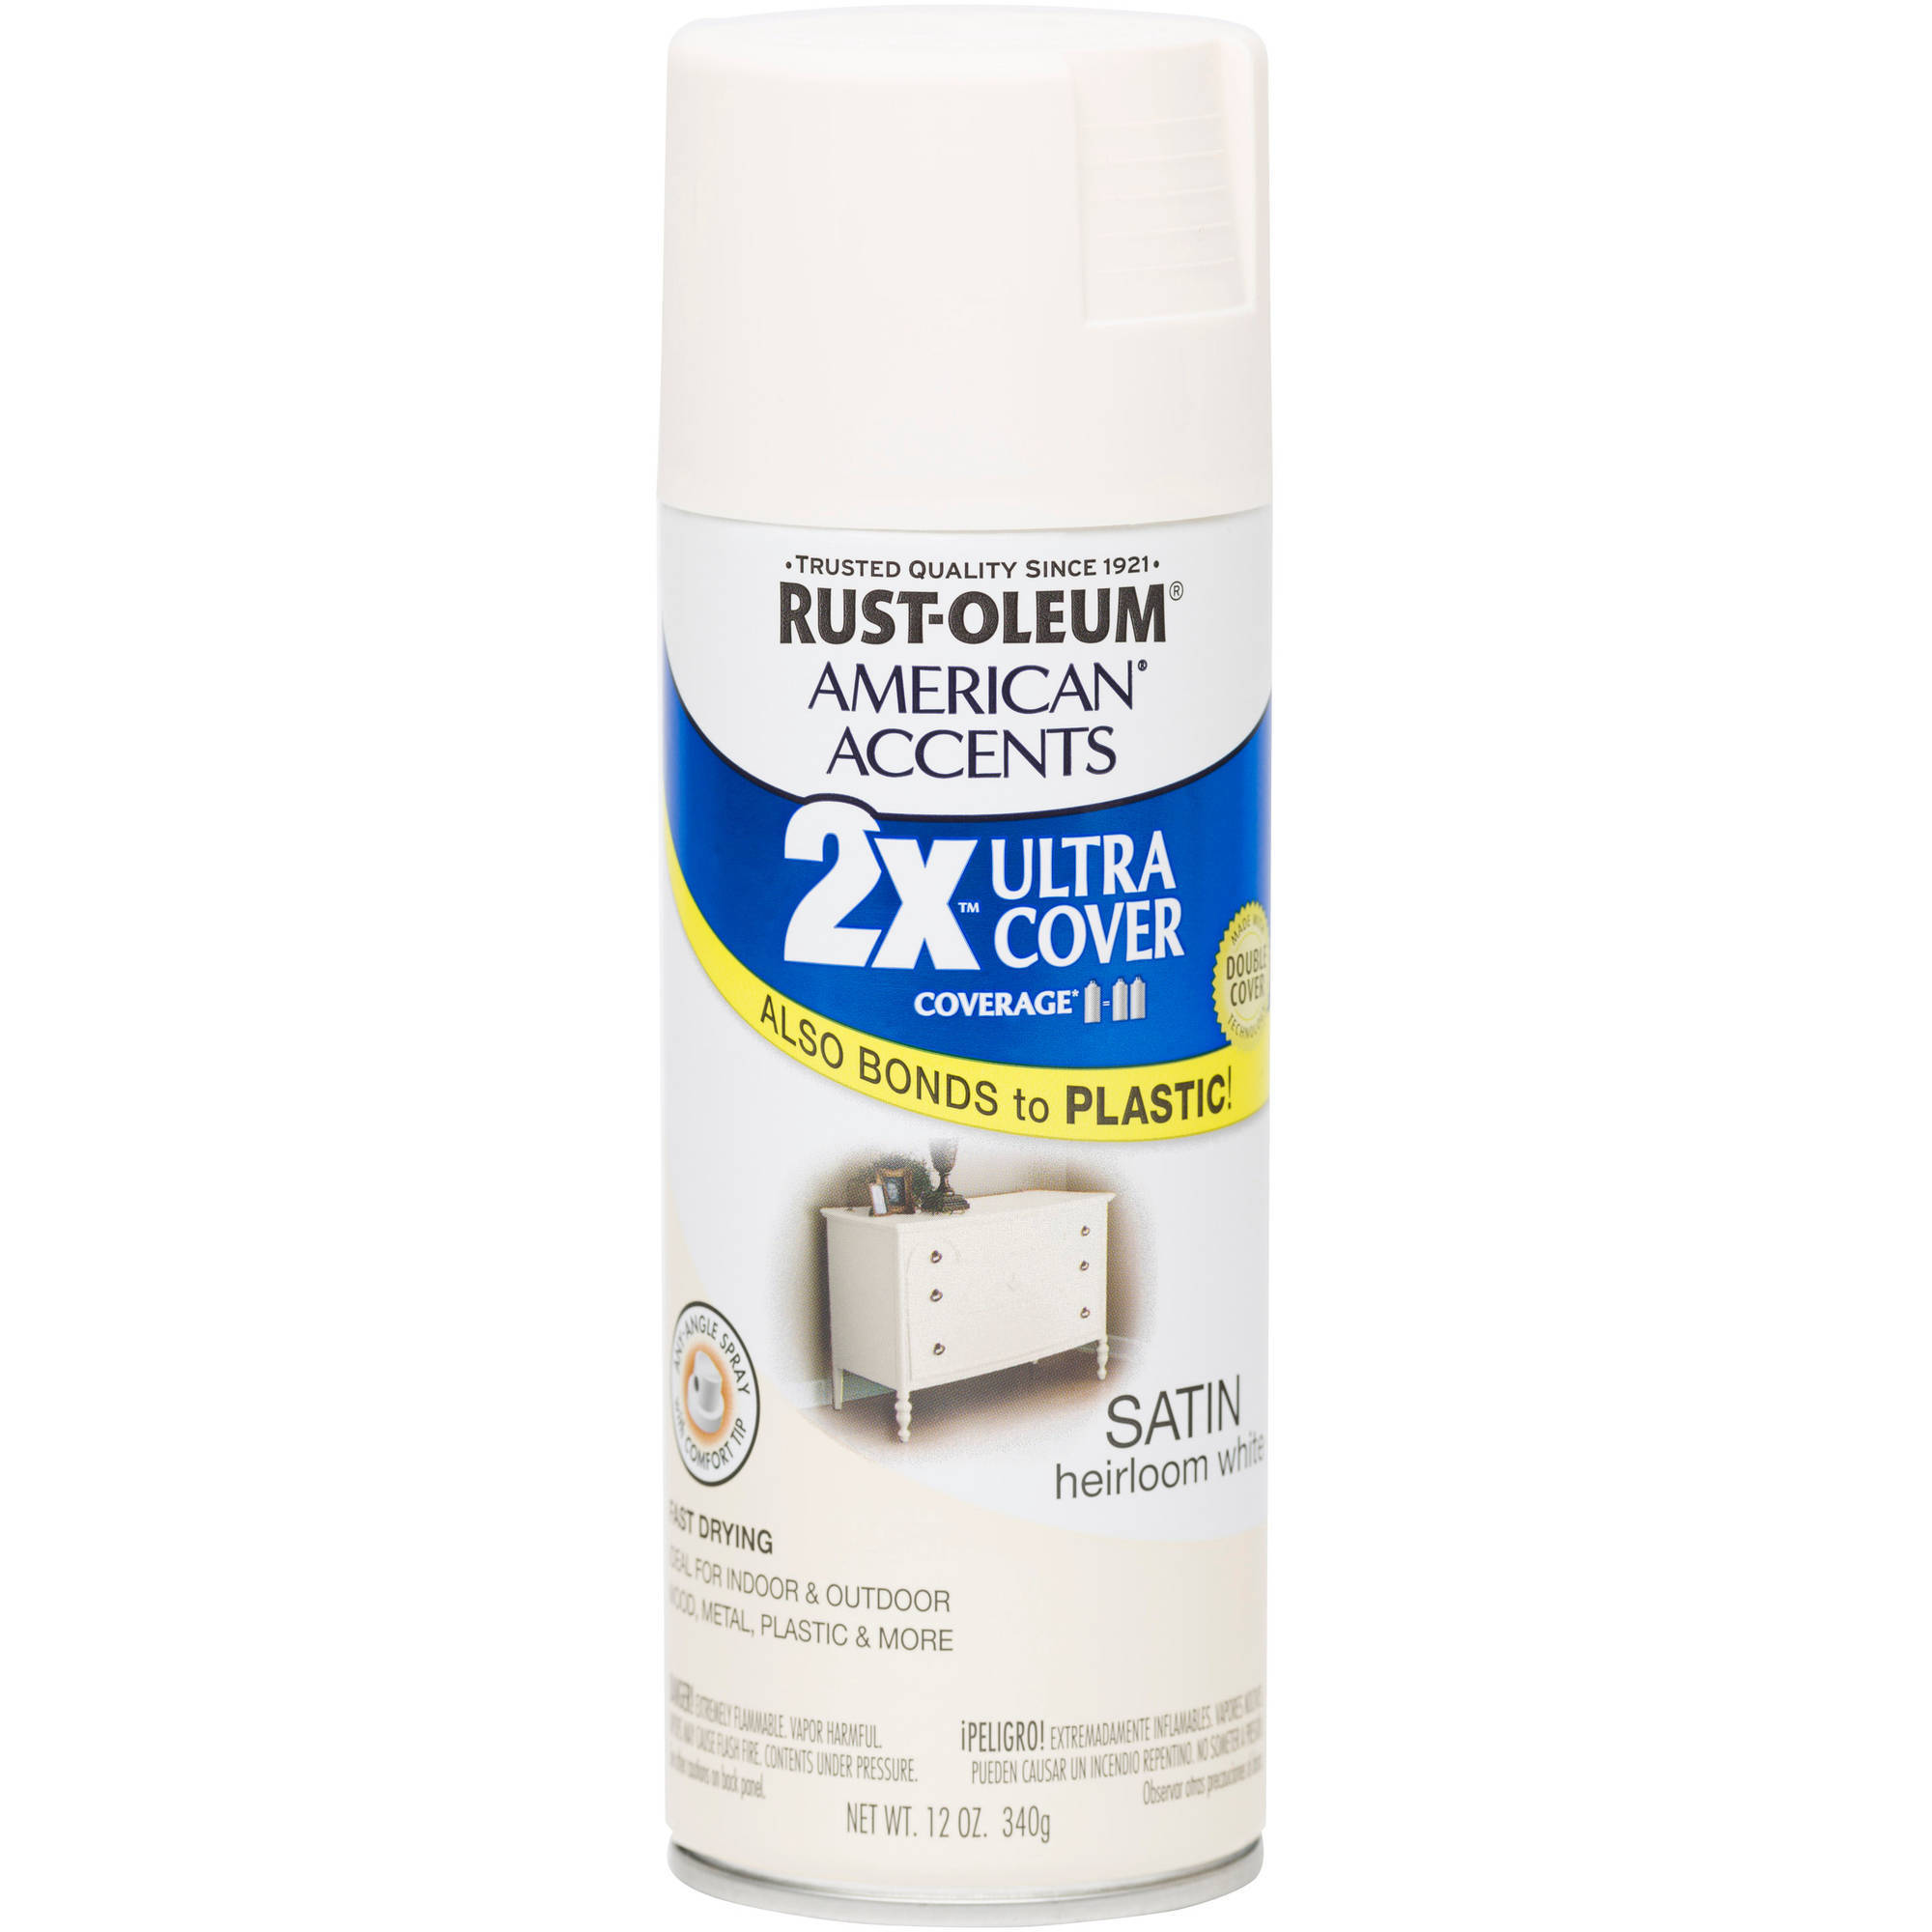 Rust-Oleum American Accents Ultra Cover 2X Satin Heirloom White Spray Paint and Primer in 1, 12 oz - image 1 of 3